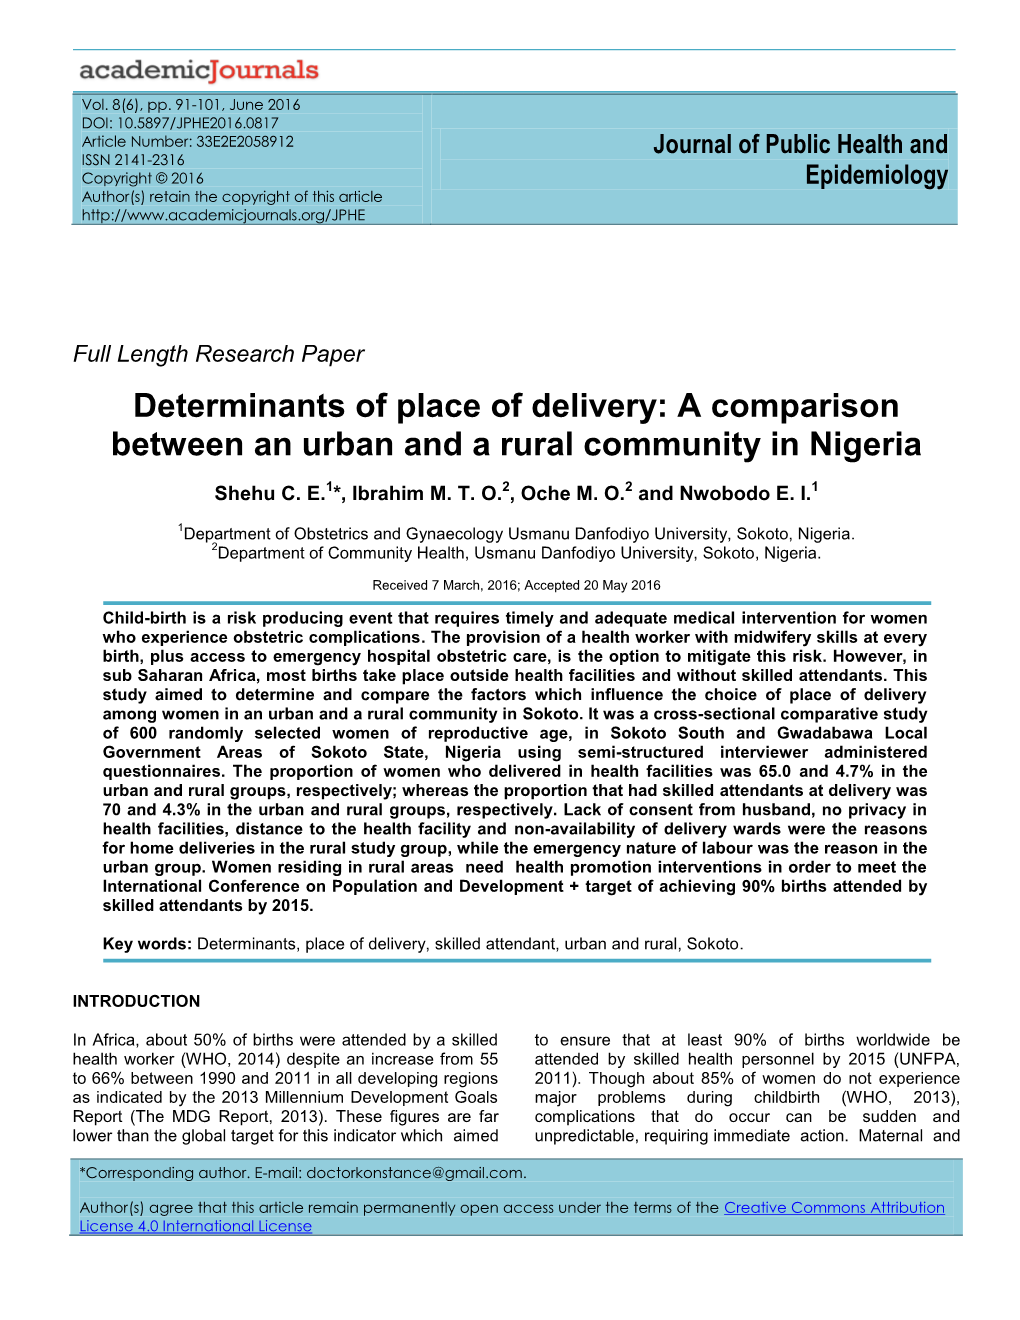 Determinants of Place of Delivery: a Comparison Between an Urban and a Rural Community in Nigeria